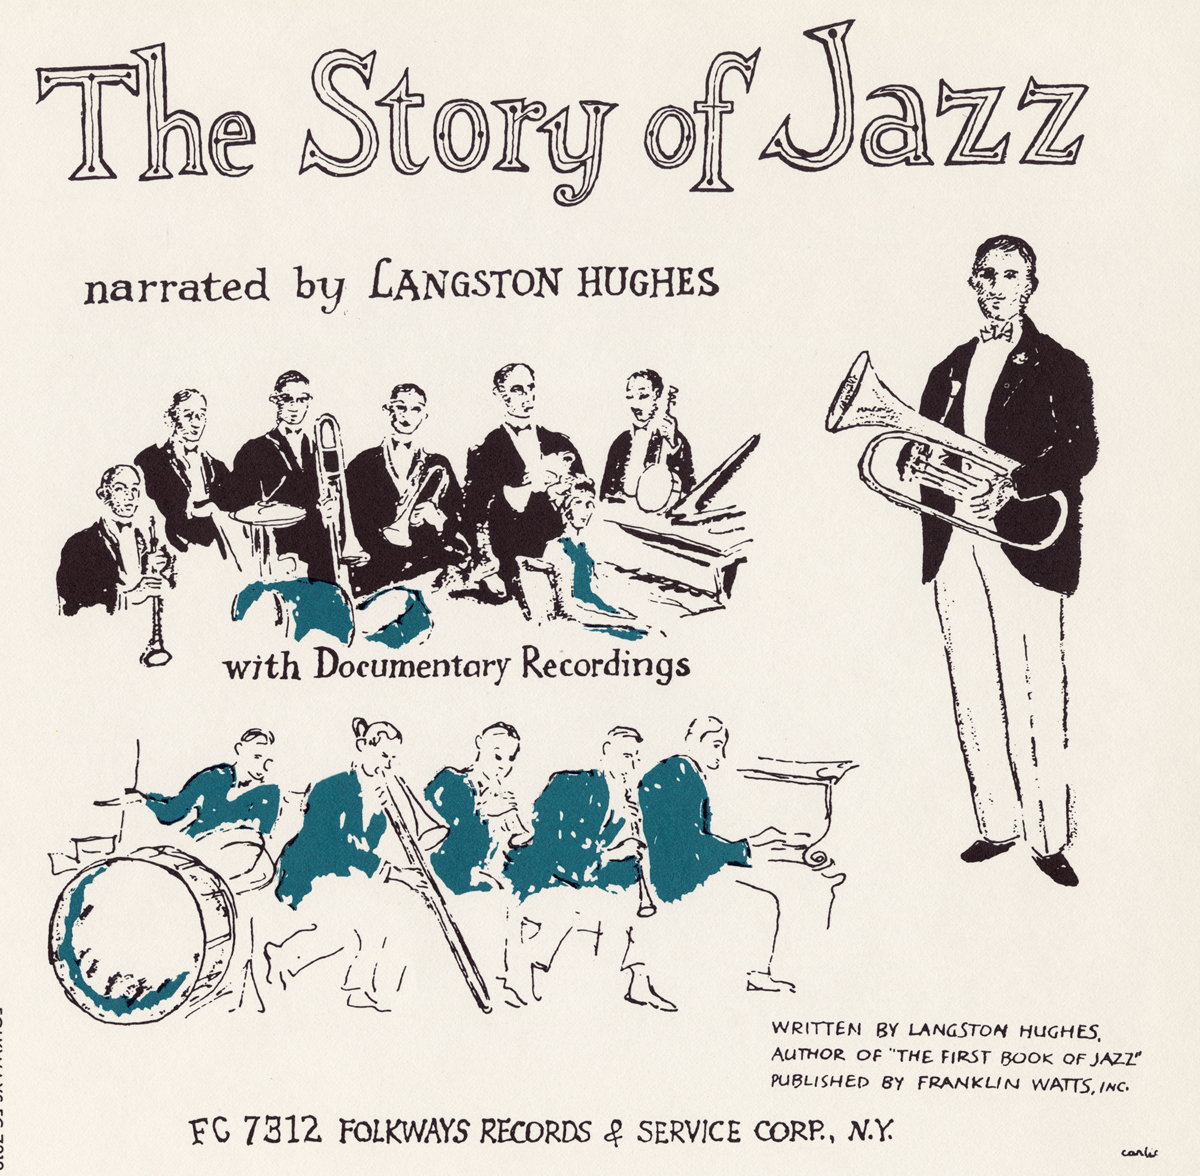 THE STORY OF JAZZ